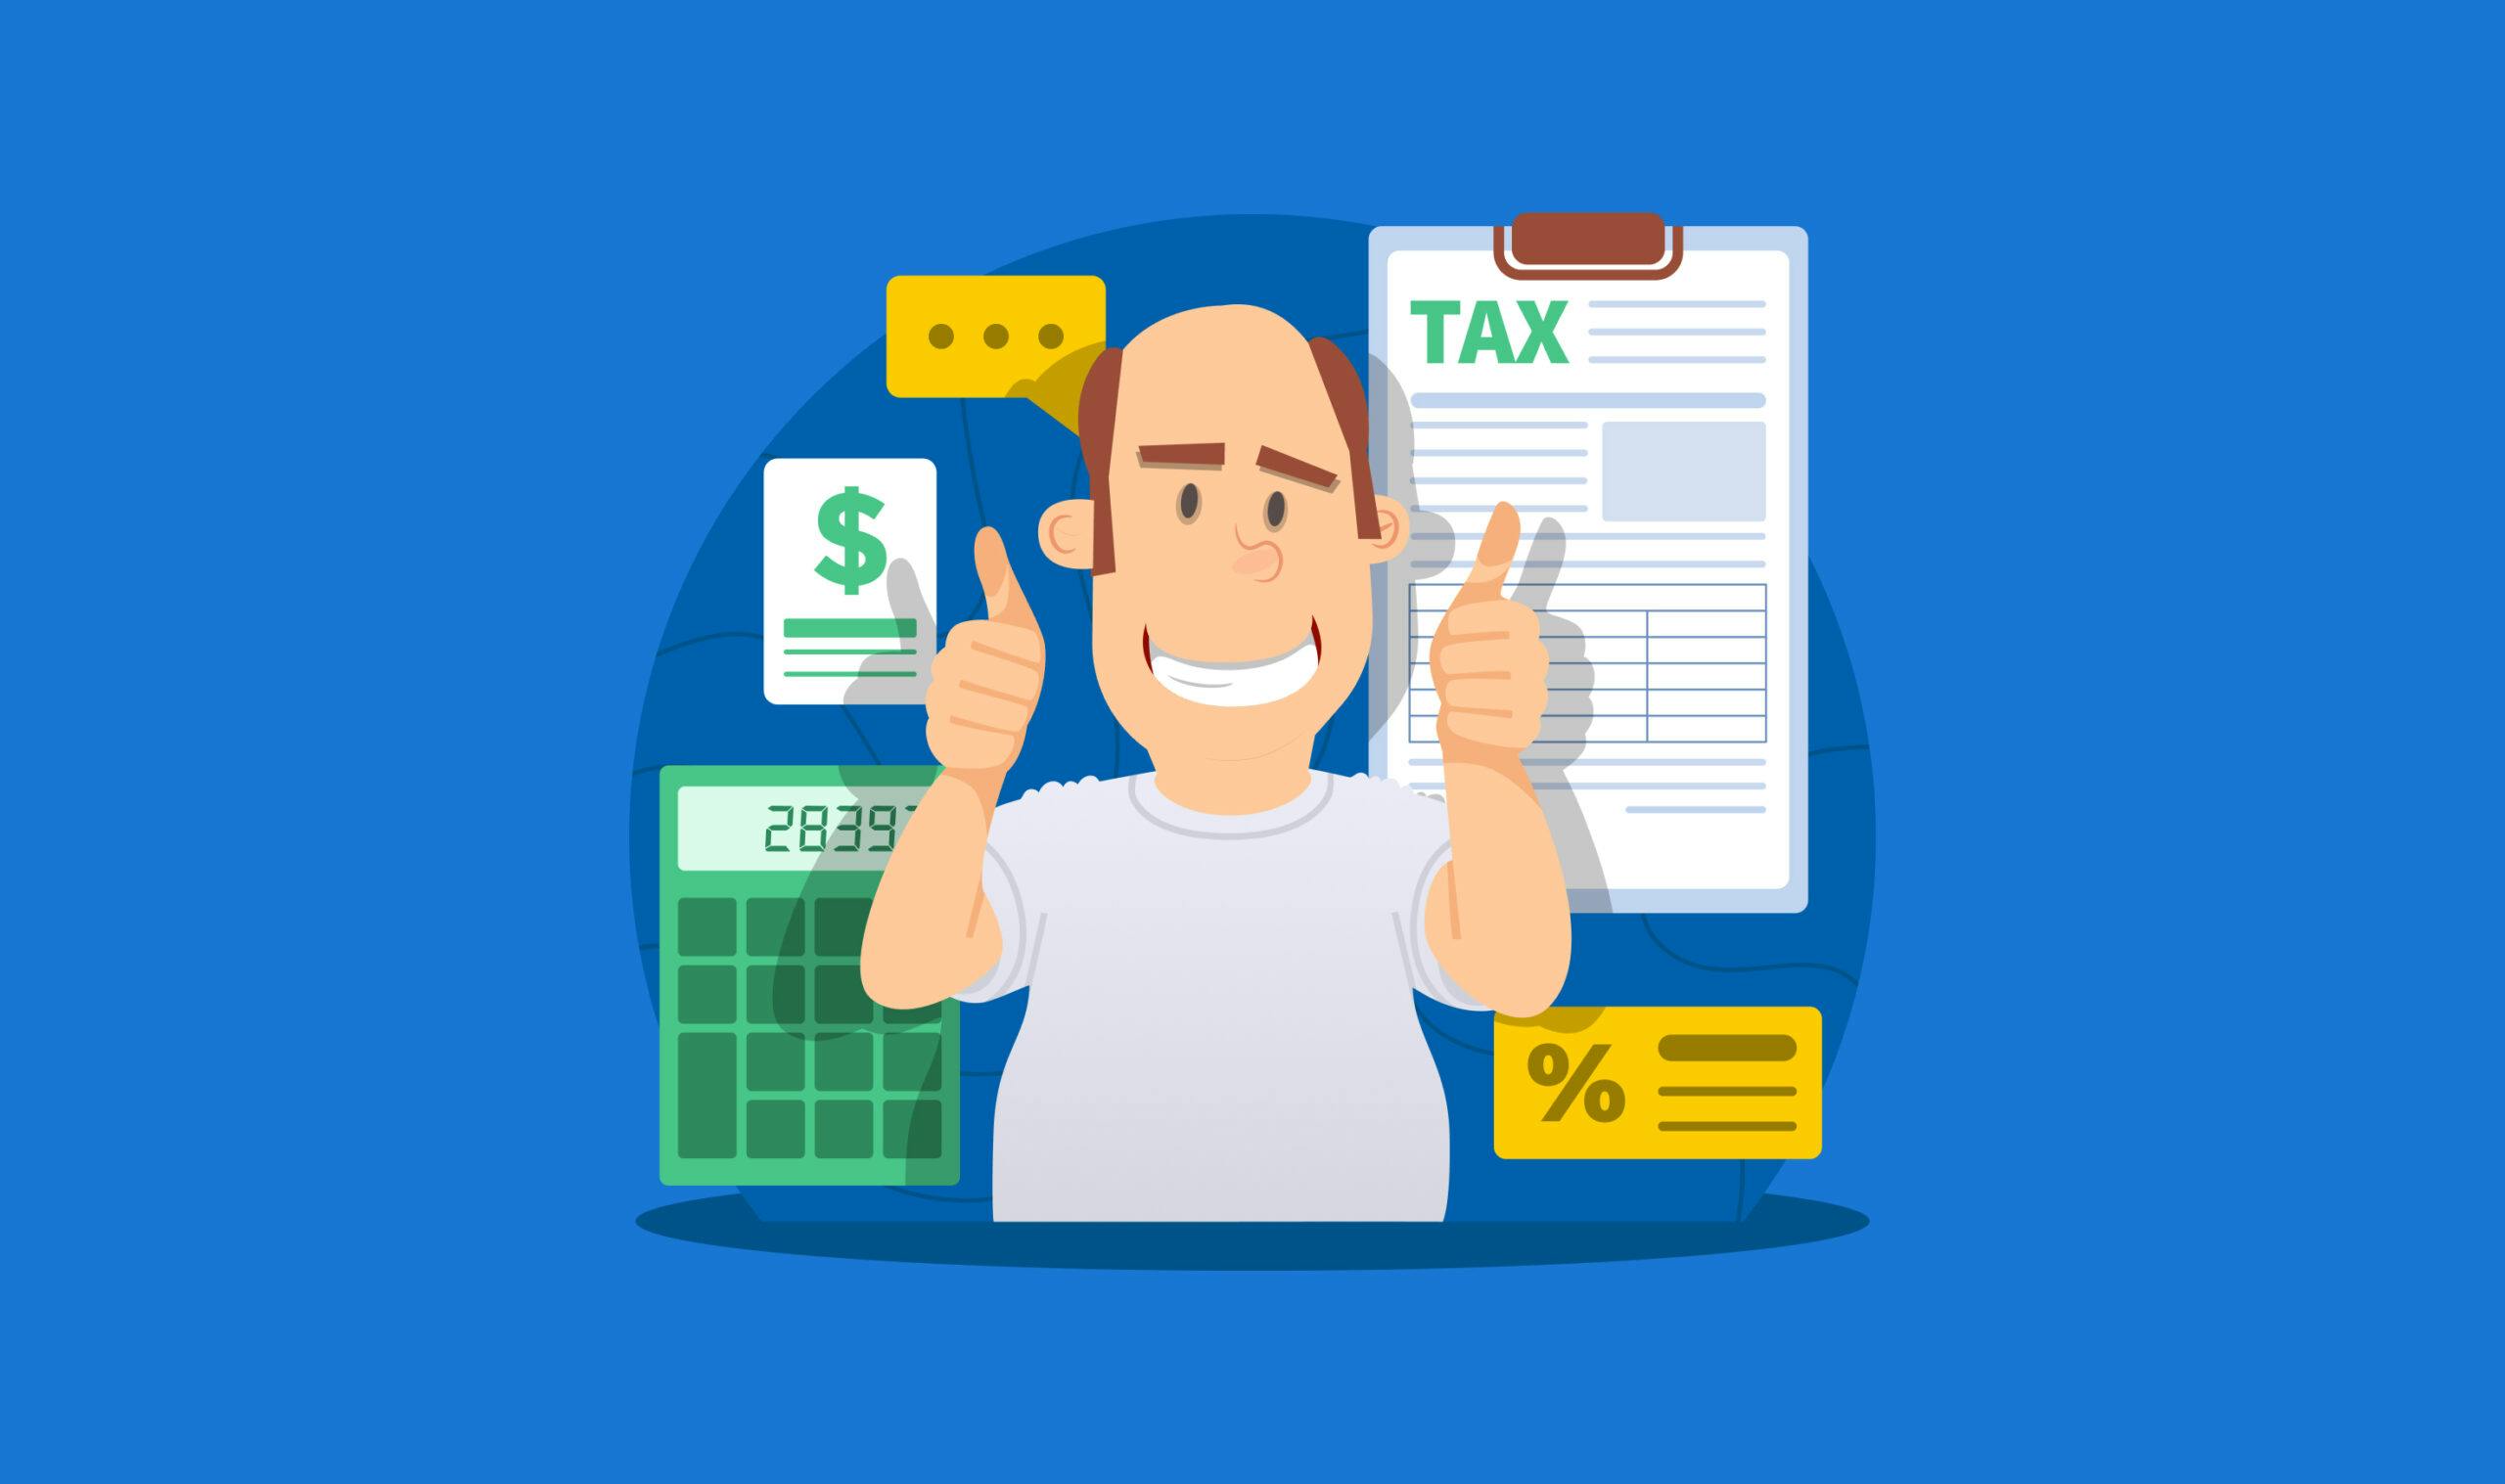 TaxDome Academy’s Tax Prep Course Offers Essential Tools for a Stress-Free Tax Season